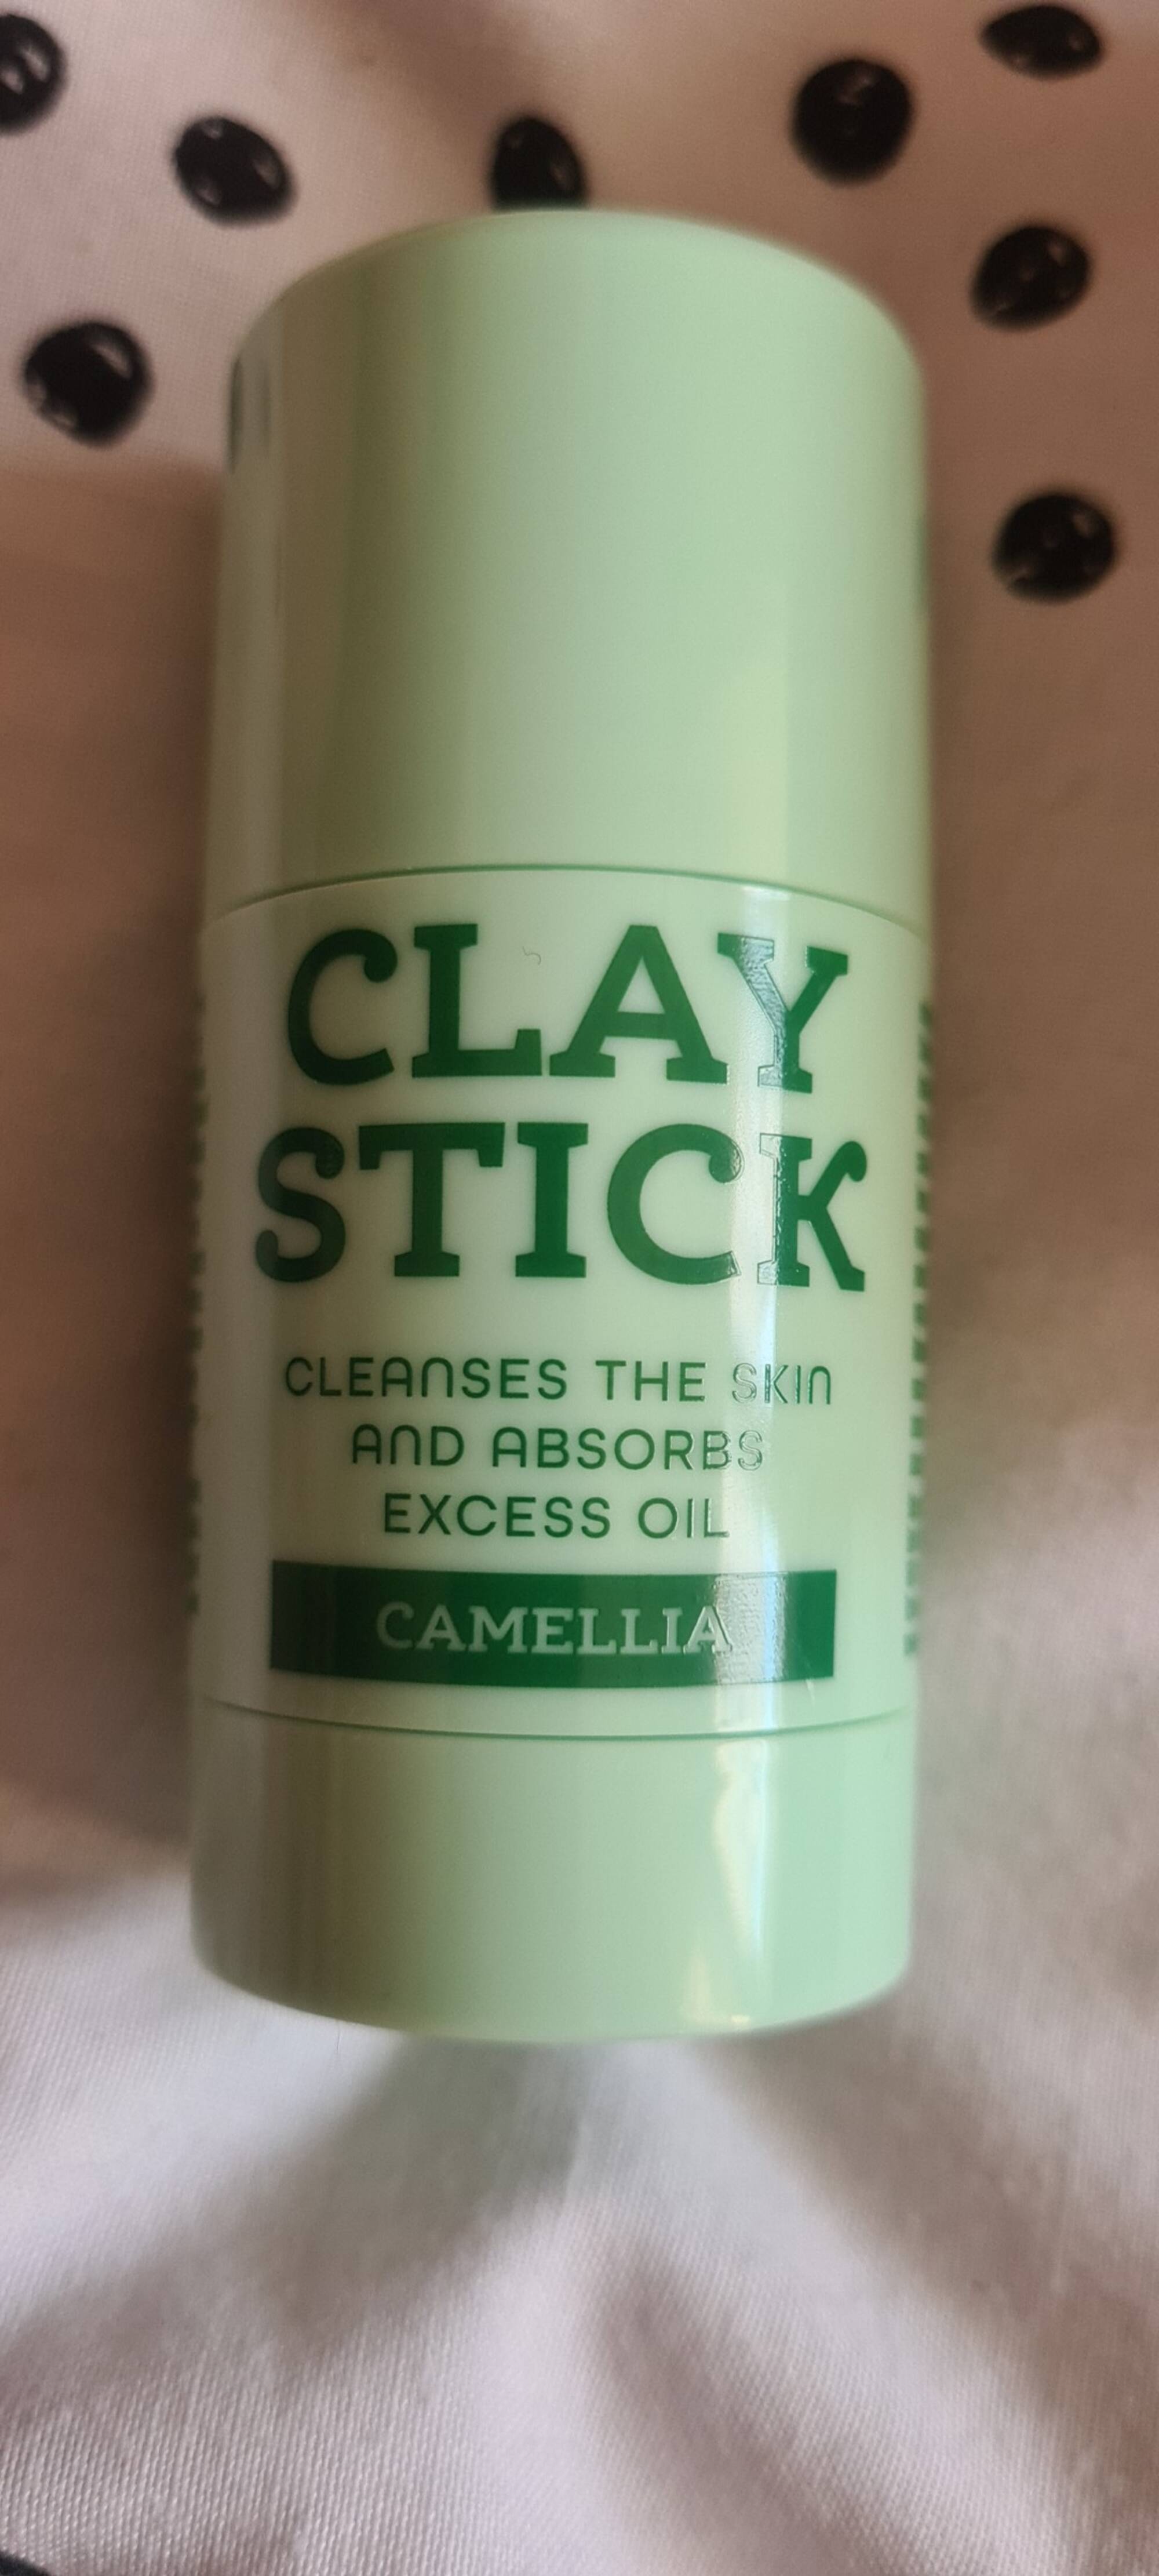 ACTION - Clay stick - Face mask camellia